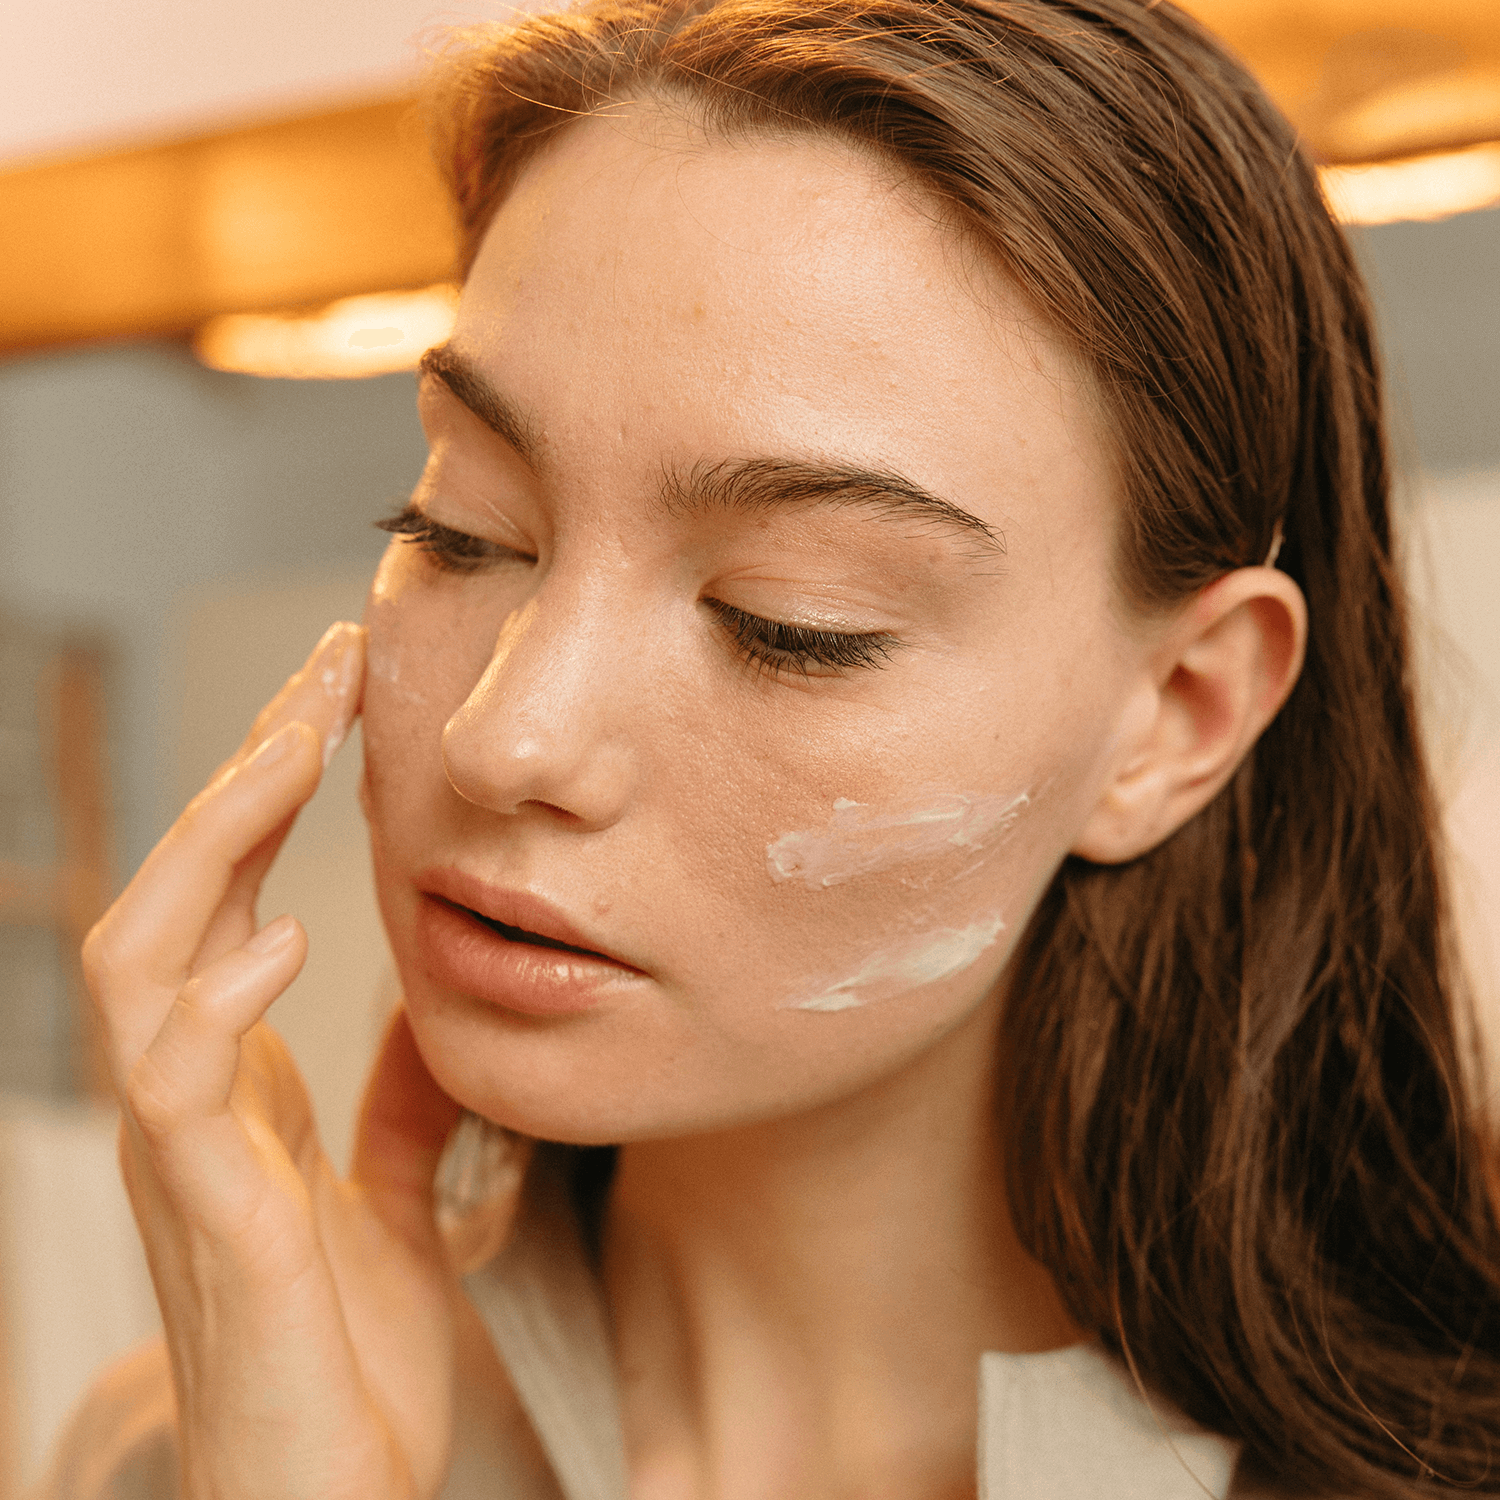 How to Do a Glow Facial at Home in 6 Steps